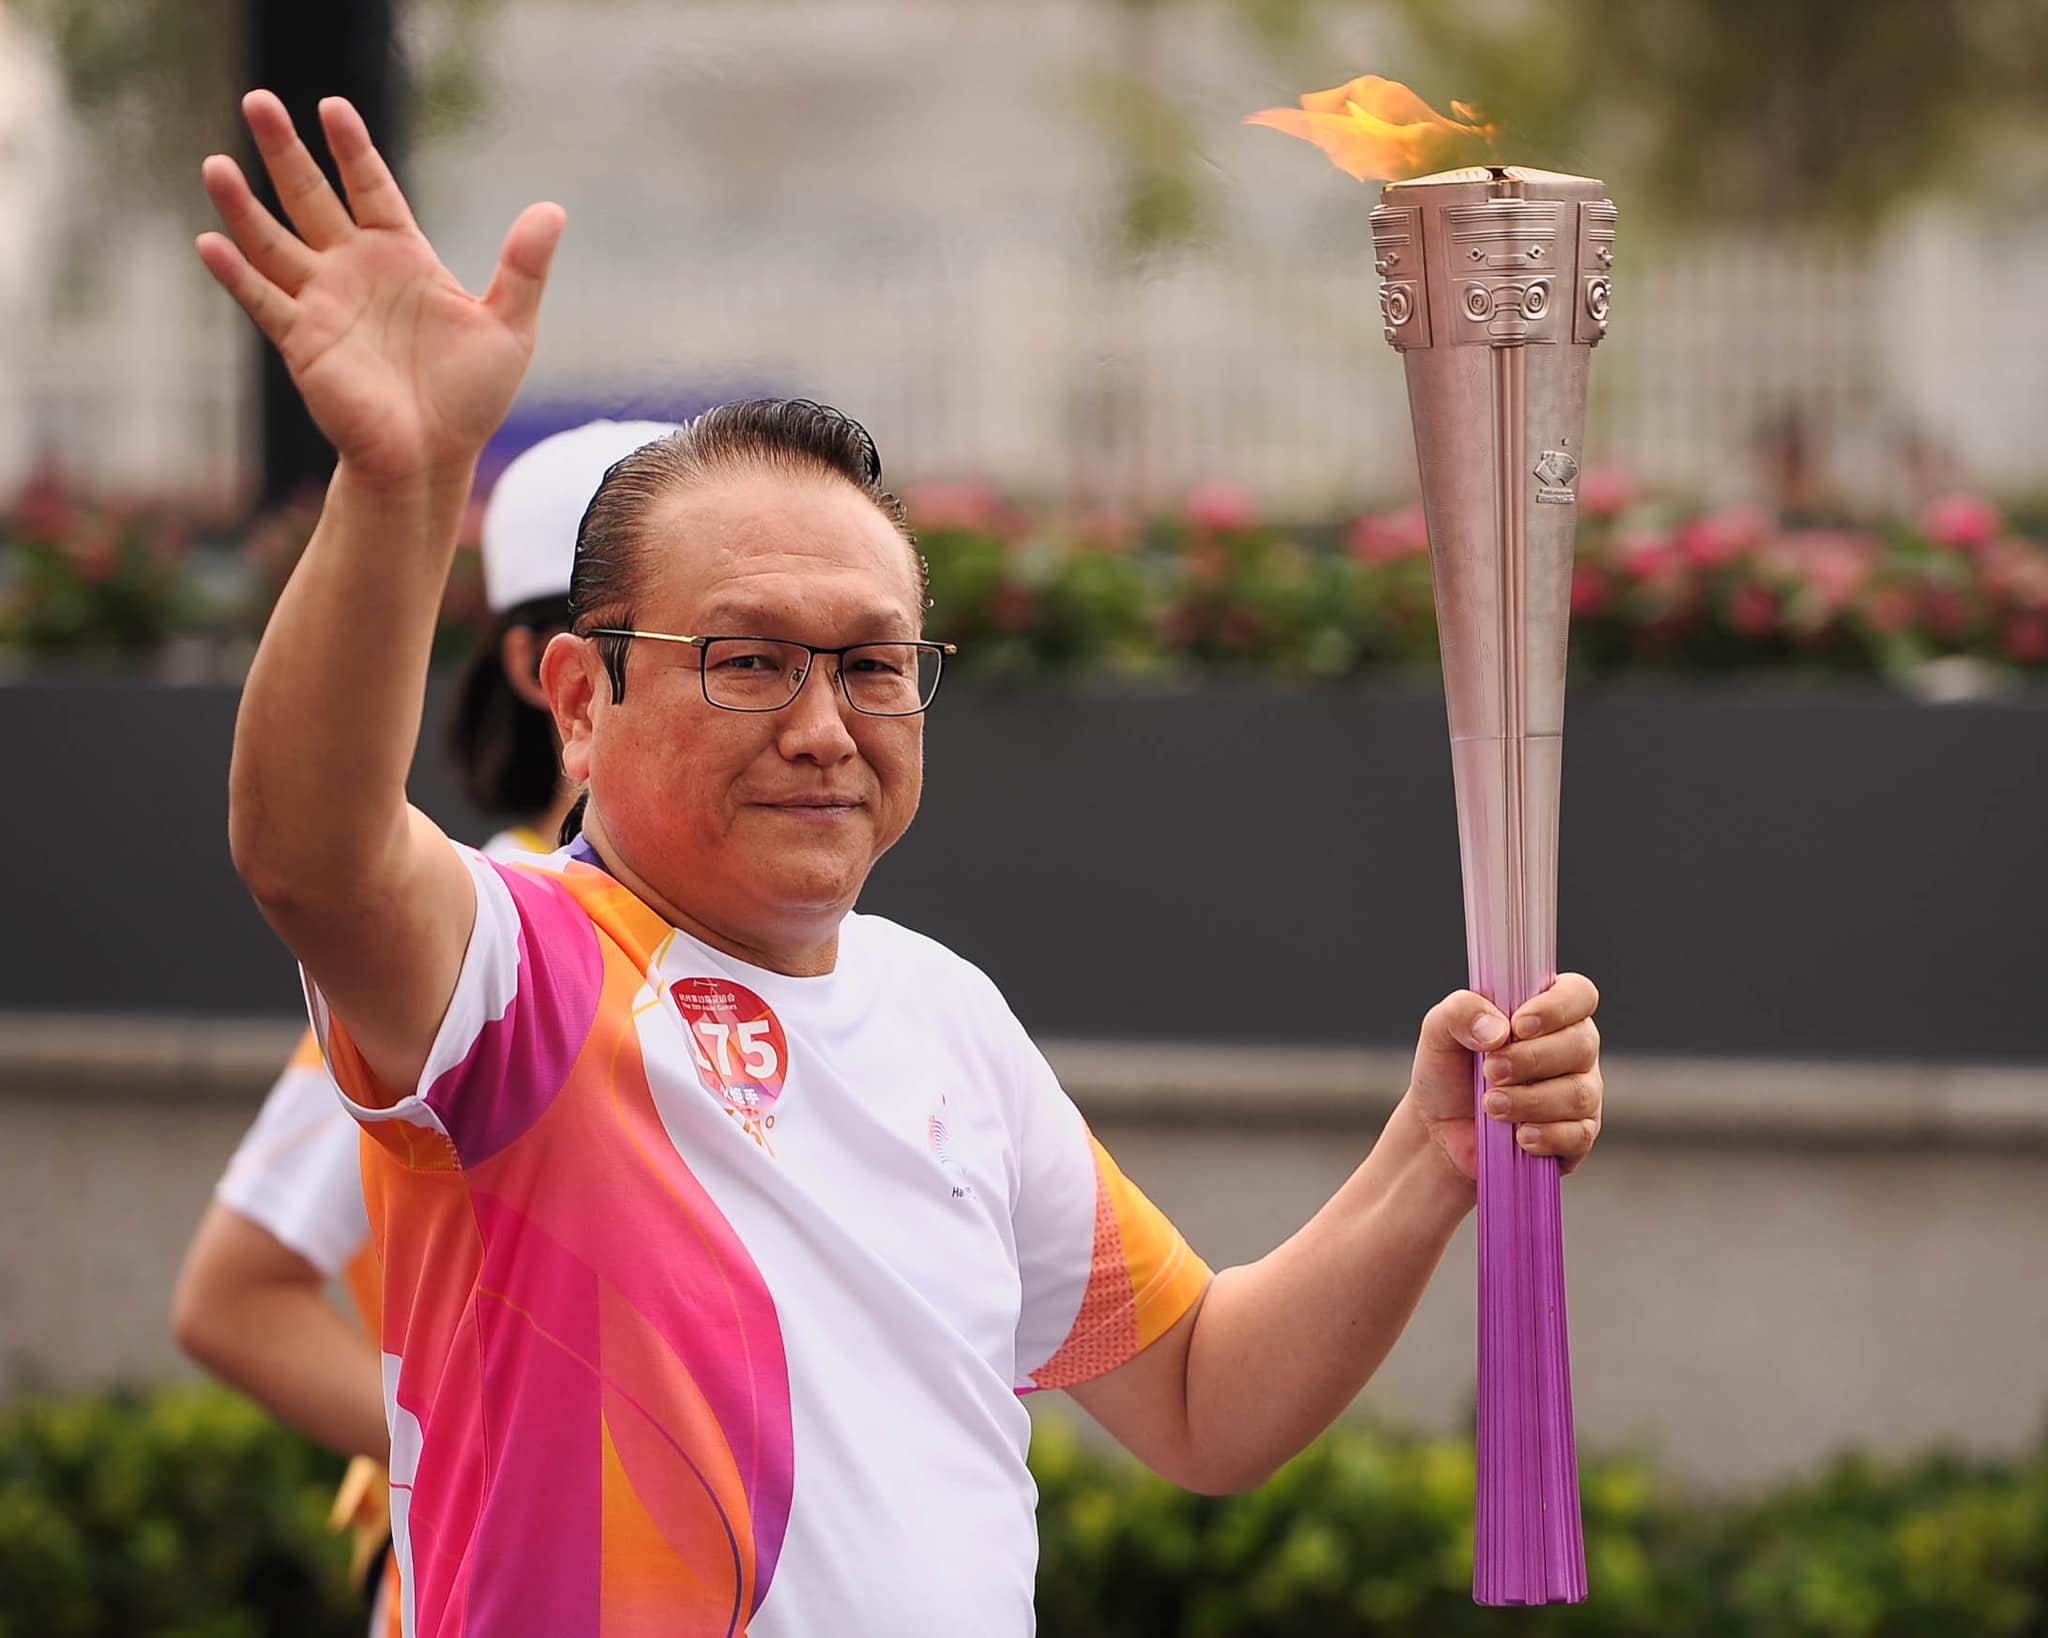 Praise for Malaysian athletes’ conduct shines at Asian Games